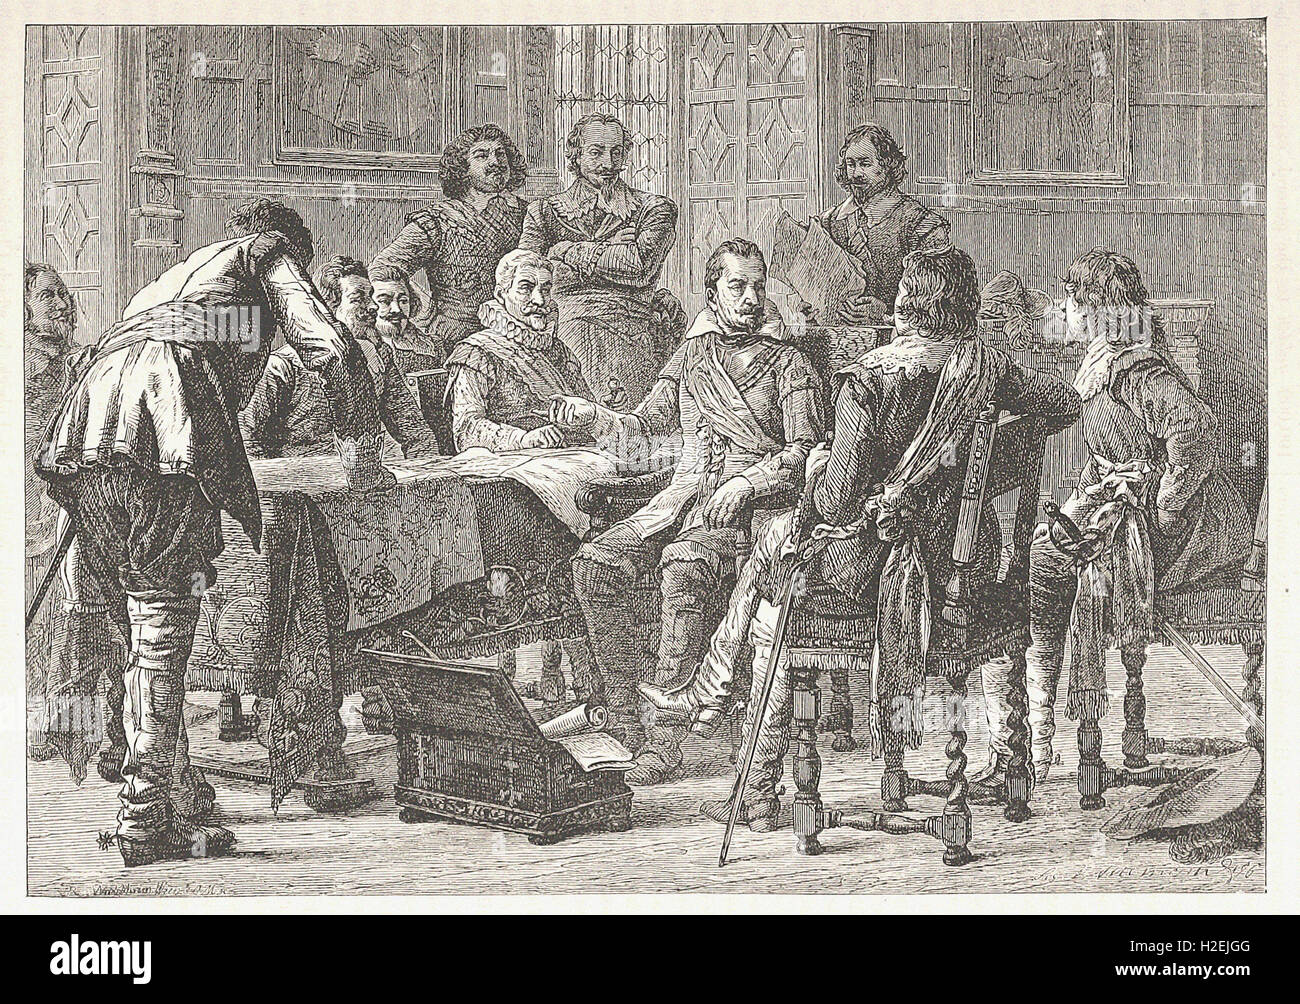 WALLENSTEIN AND TILLY HOLDING A COUNCIL OF WAR - from 'Cassell's Illustrated Universal History' - 1882 Stock Photo